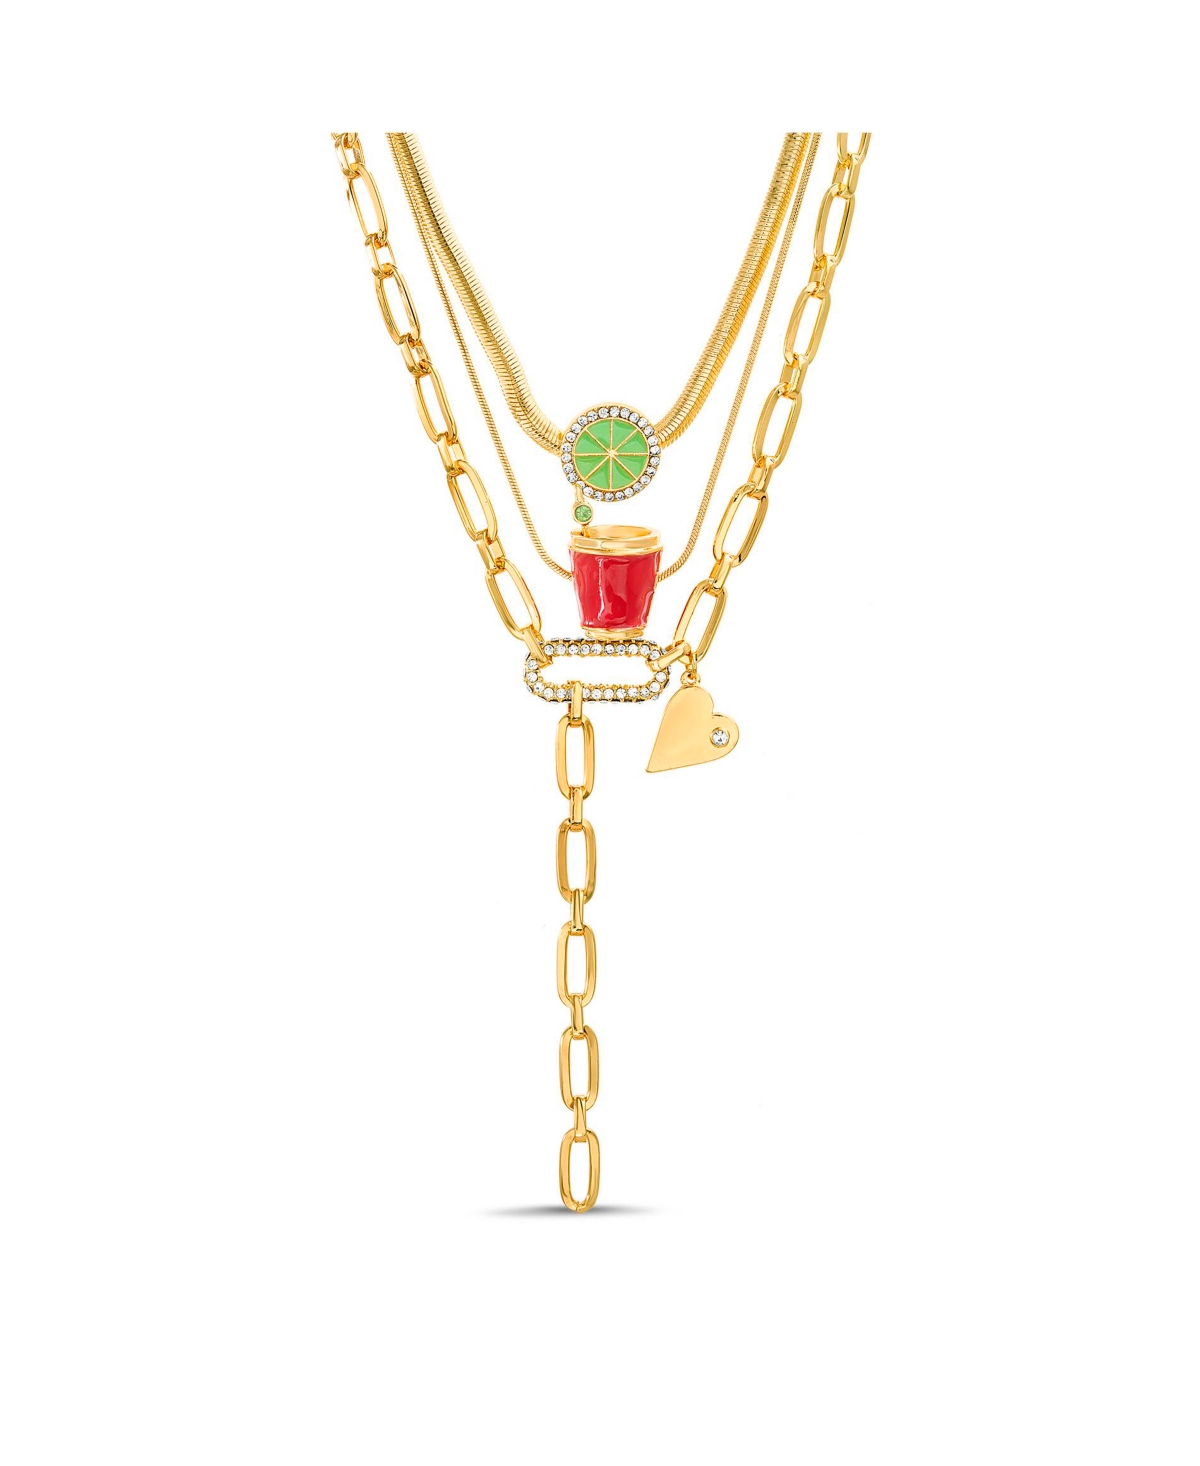 Multi 3 Piece Mixed Chain Necklace Set with Red Cup, Line and Heart Charm Pendants - Multi